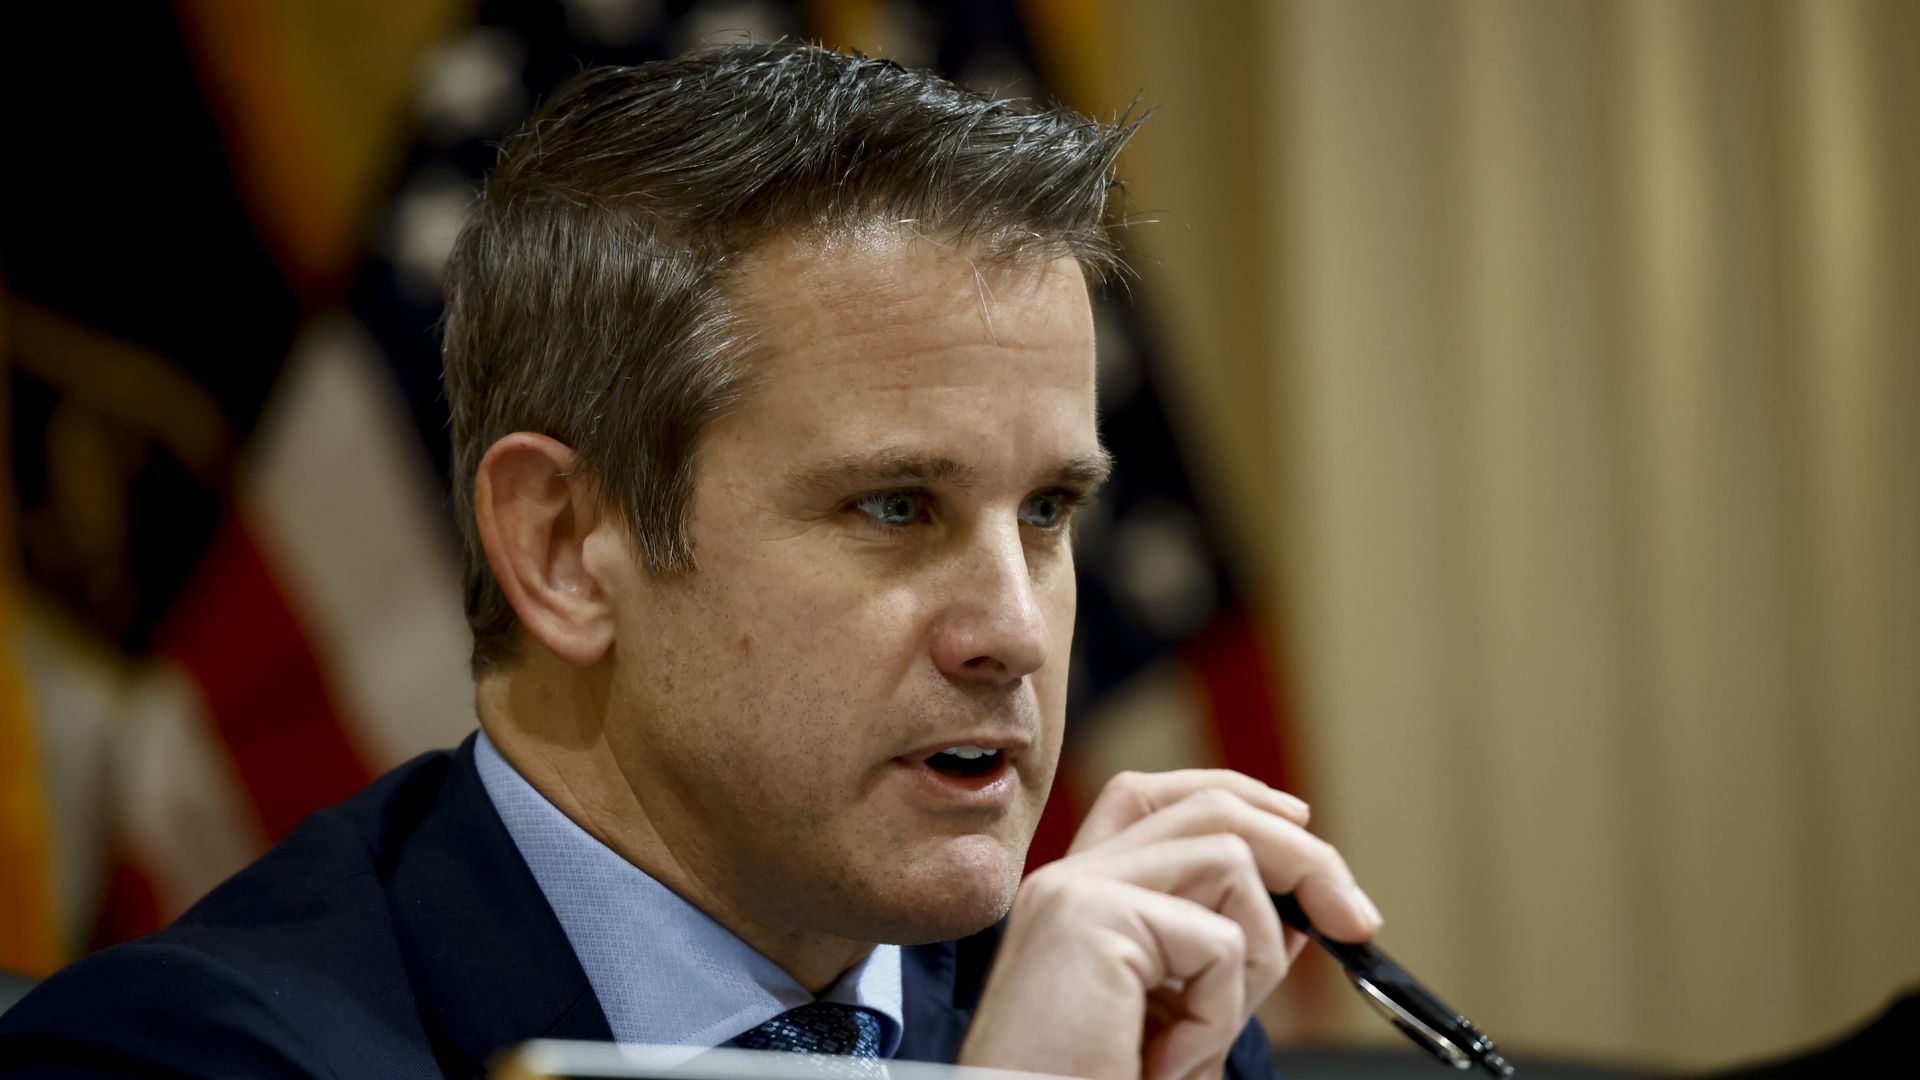 Representative Adam Kinzinger, a Republican from Illinois, speaks during a hearing of the Select Committee to Investigate the January 6th Attack.